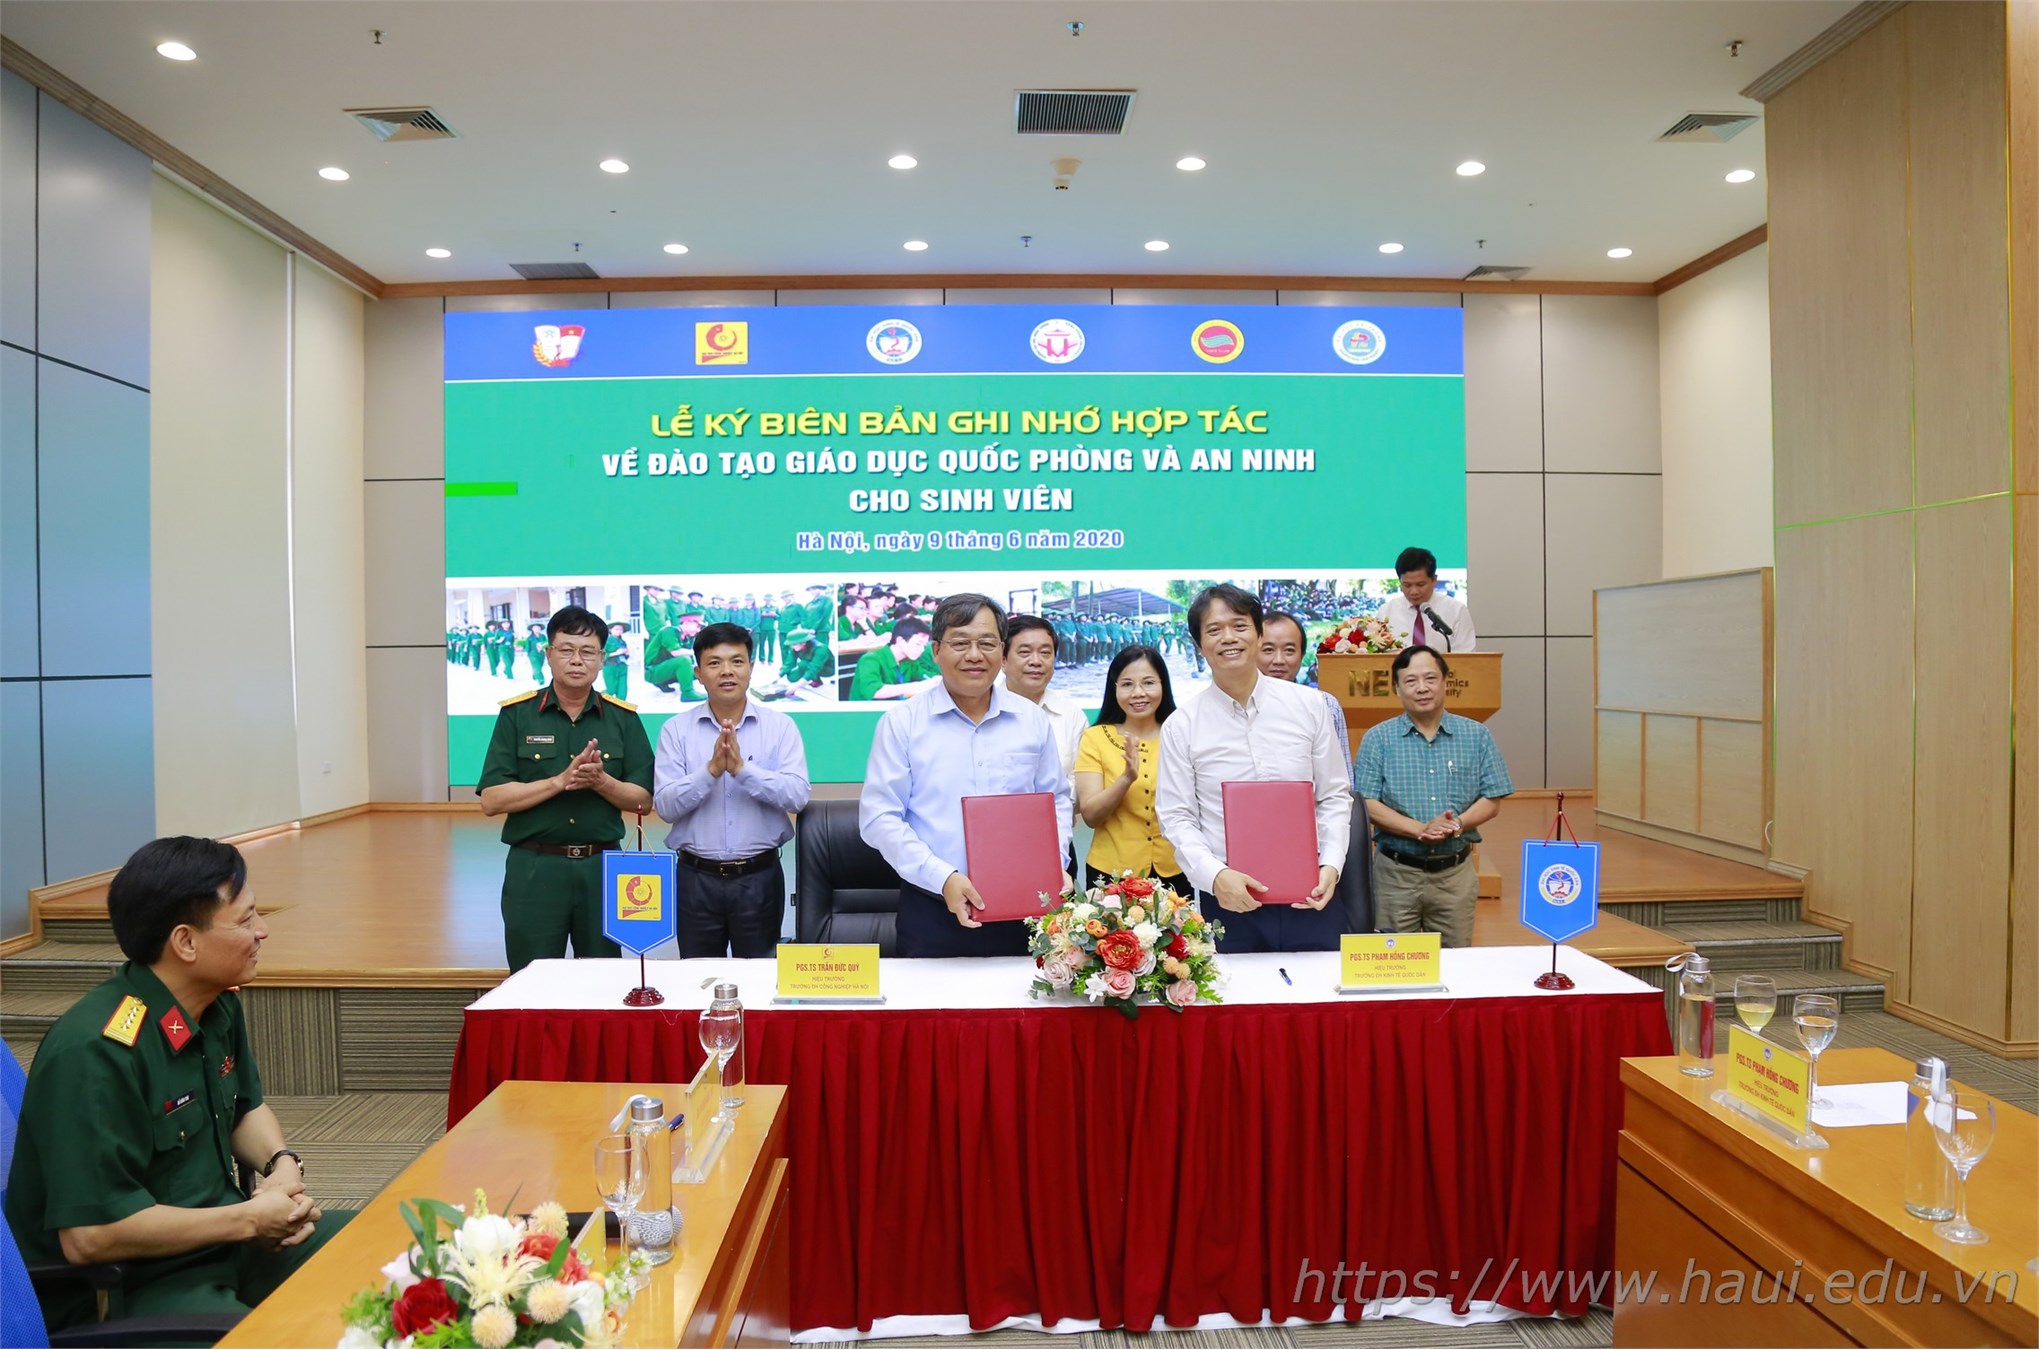 Hanoi University of Industry cooperates on defense and security education training for students with National Economics University